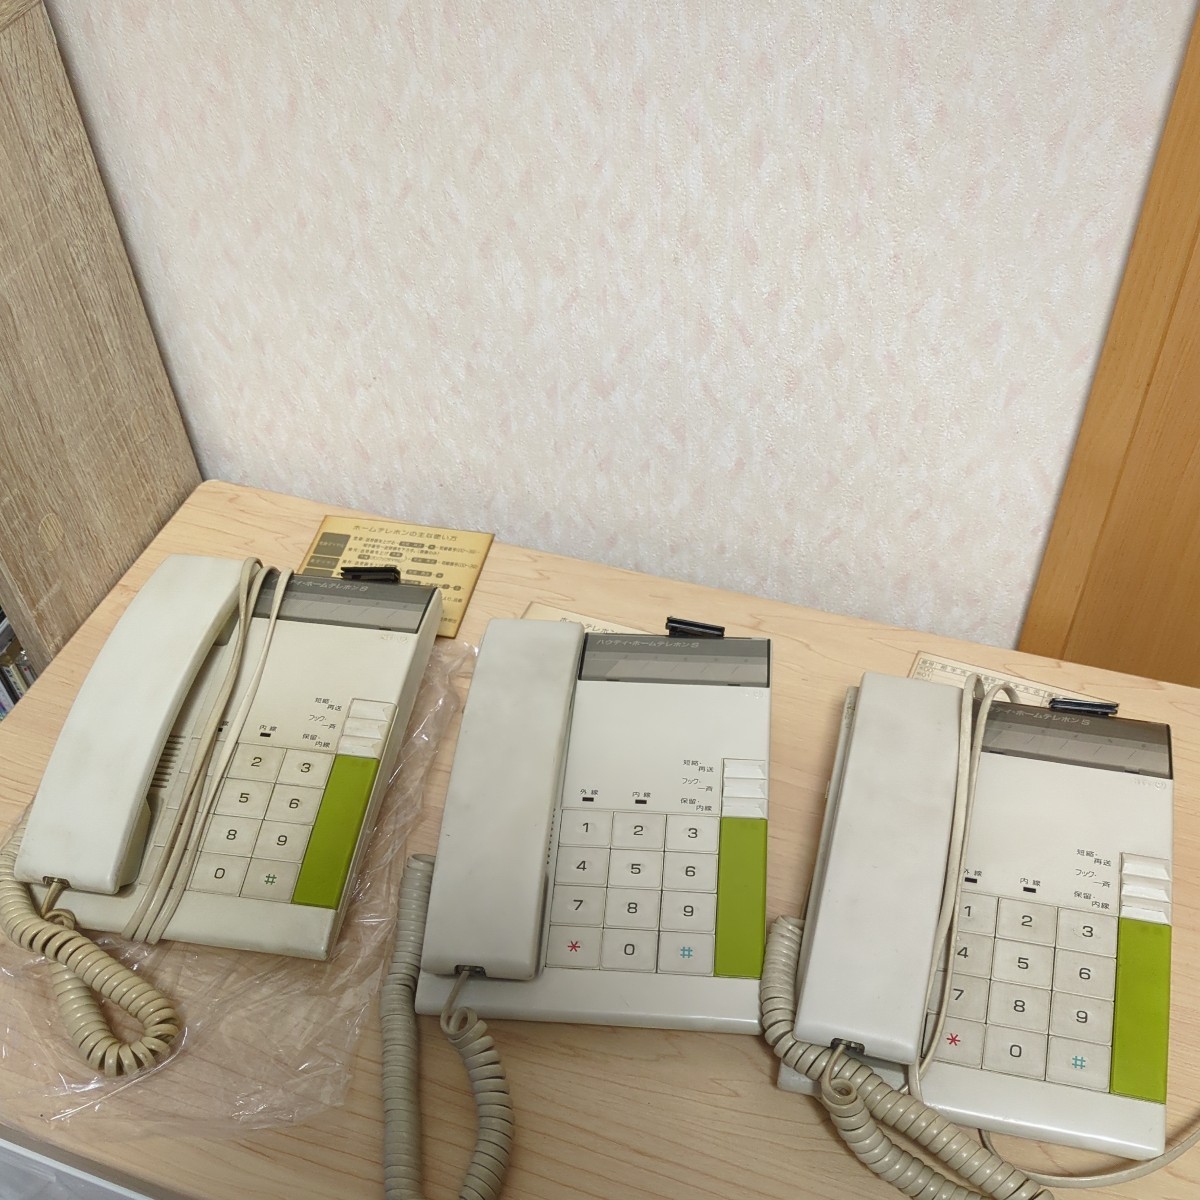 NTT is ude .* Home telephone slim 3 pcs. set H106 white is ude . telephone machine operation not yet verification present condition goods junk treatment 